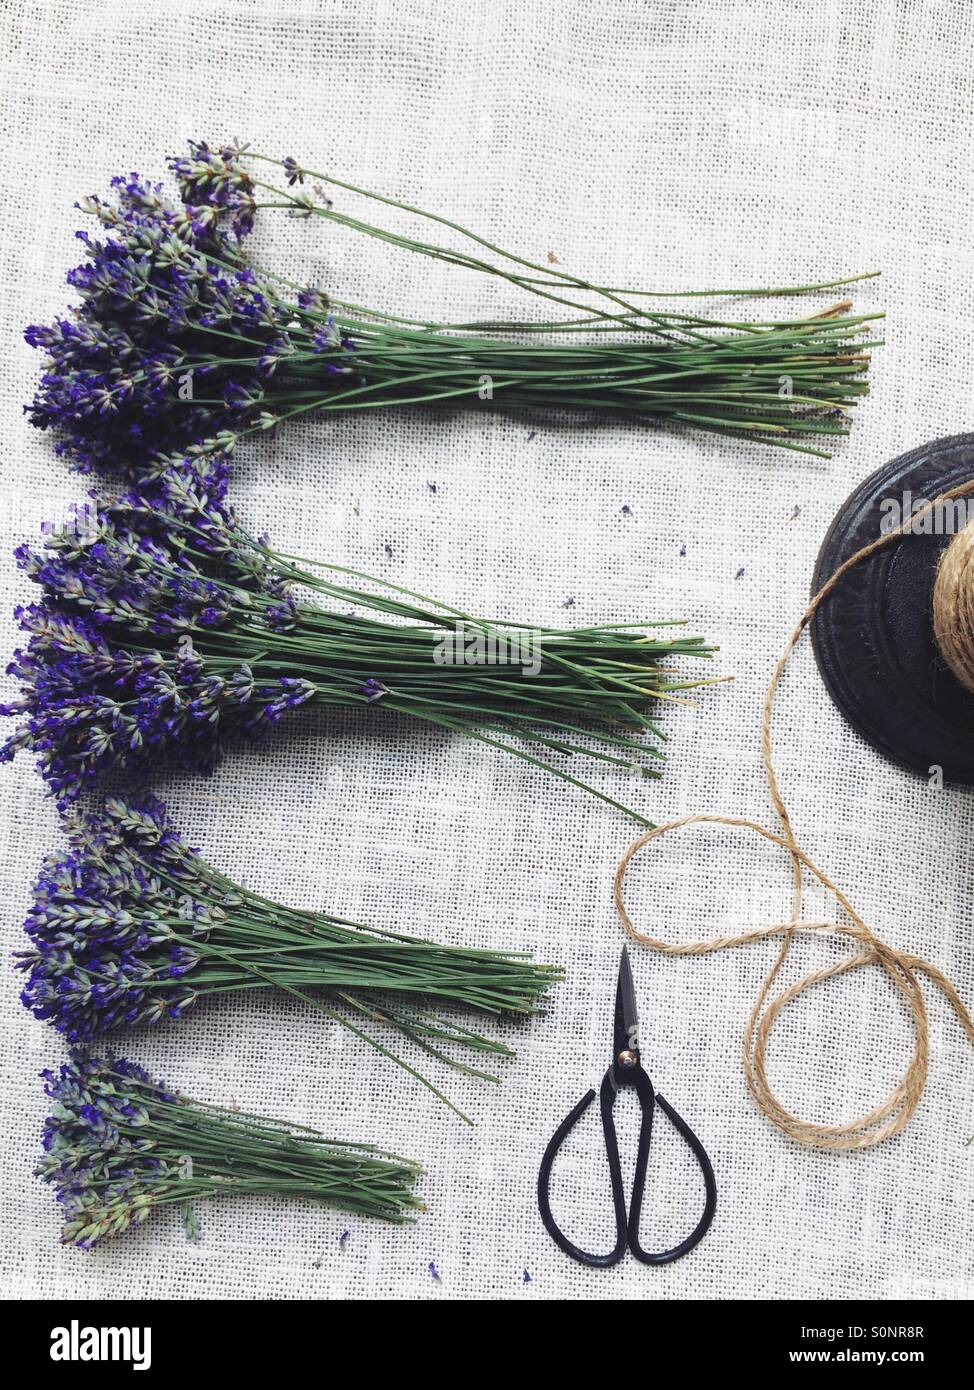 Lavender with scissors and string Stock Photo